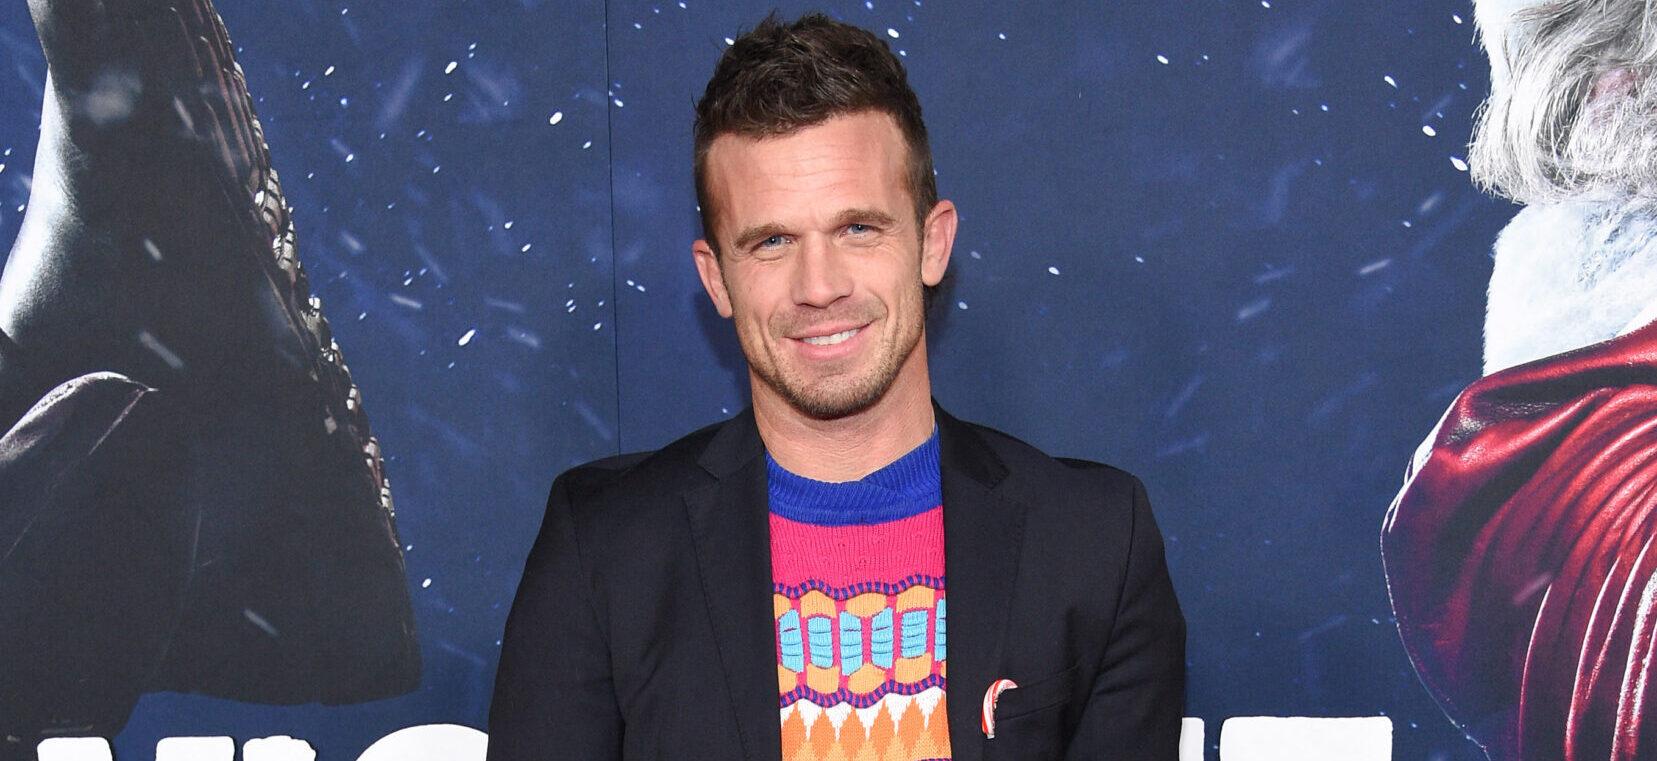 ‘Twilight’ Star Cam Gigandet To Be Evicted From His Home, Allegedly Owes $21,000 In Back Rent